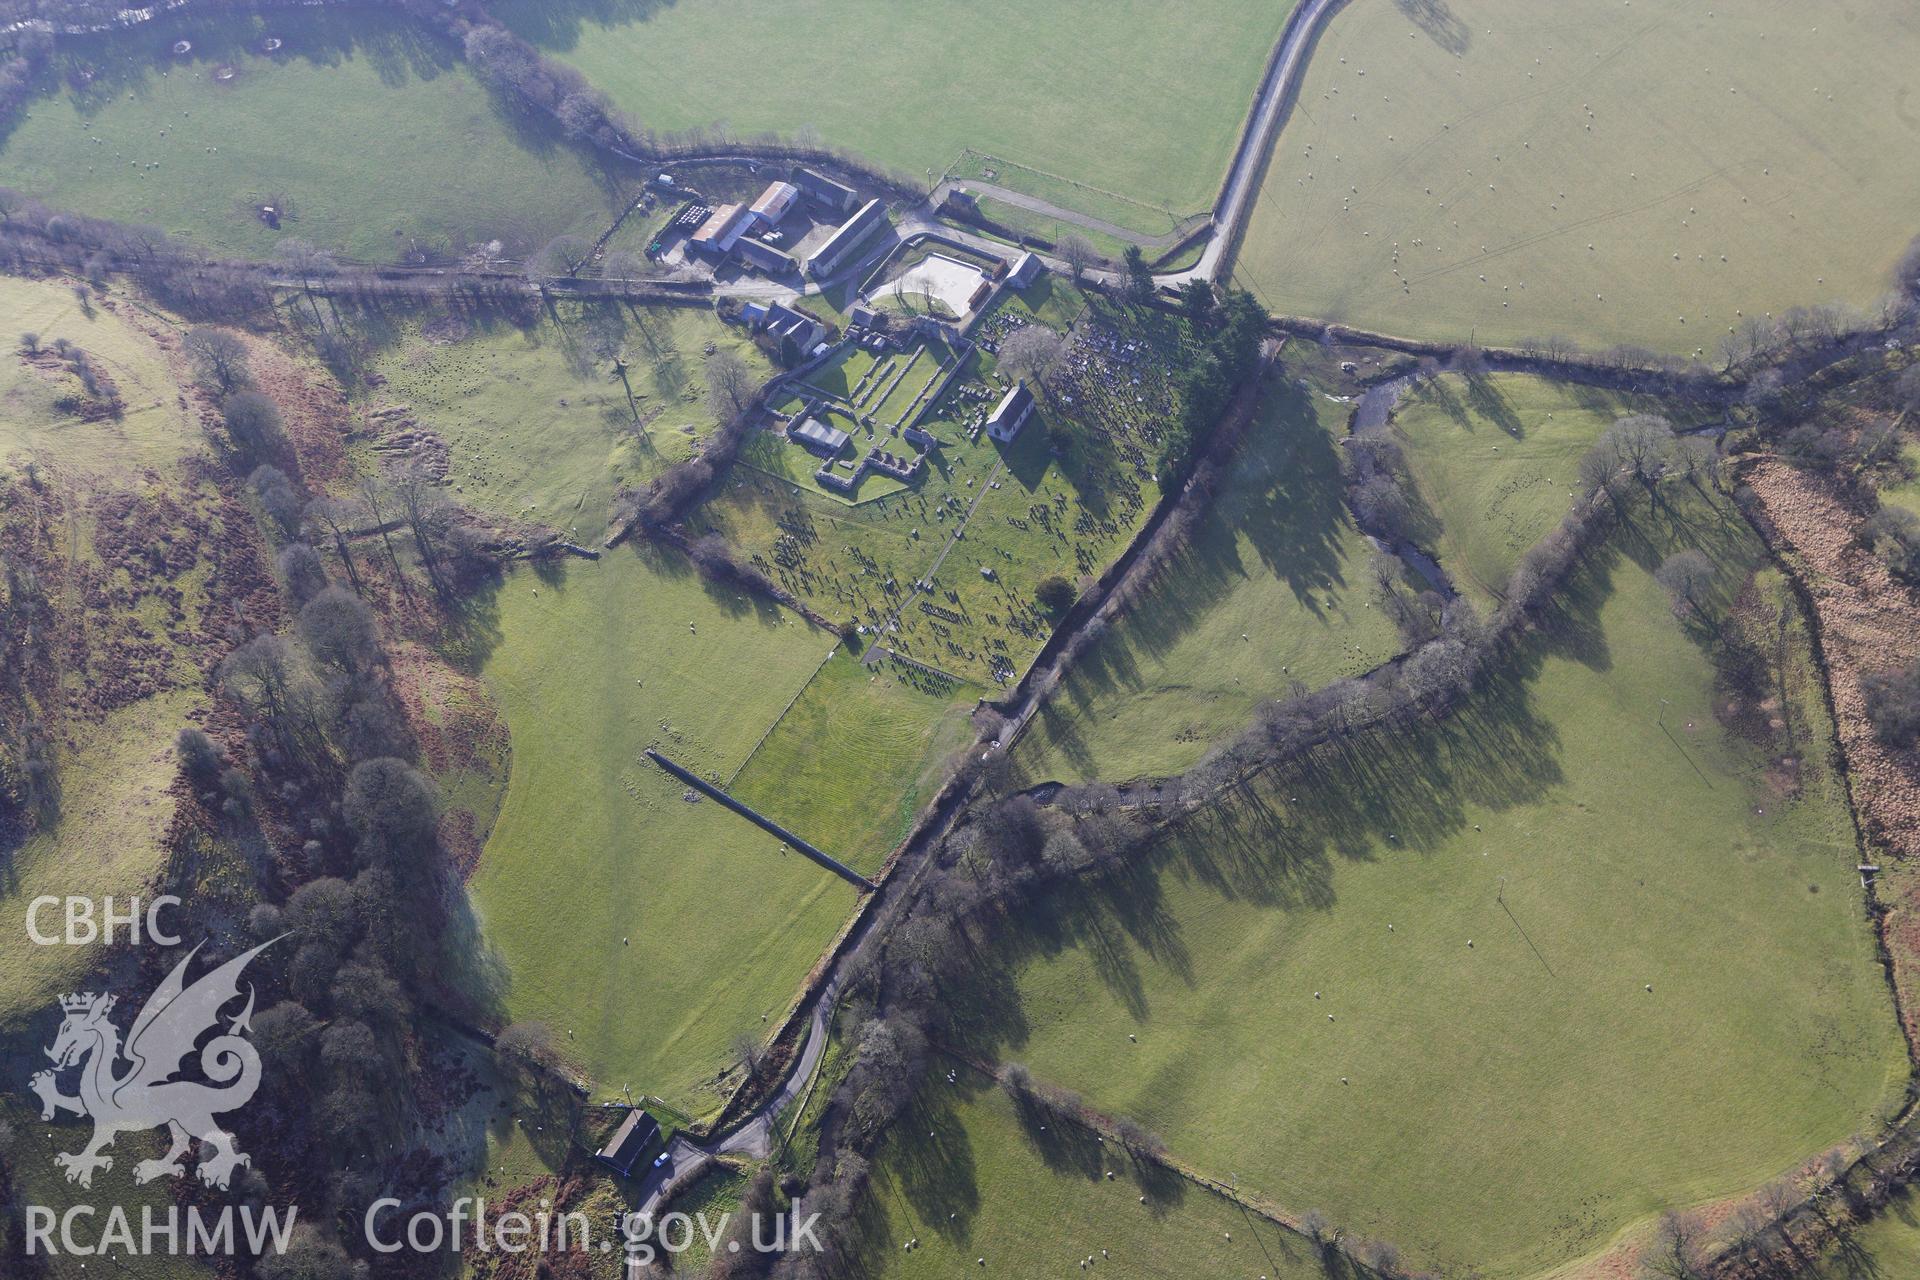 RCAHMW colour oblique photograph of Strata Florida Abbey. Taken by Toby Driver on 07/02/2012.